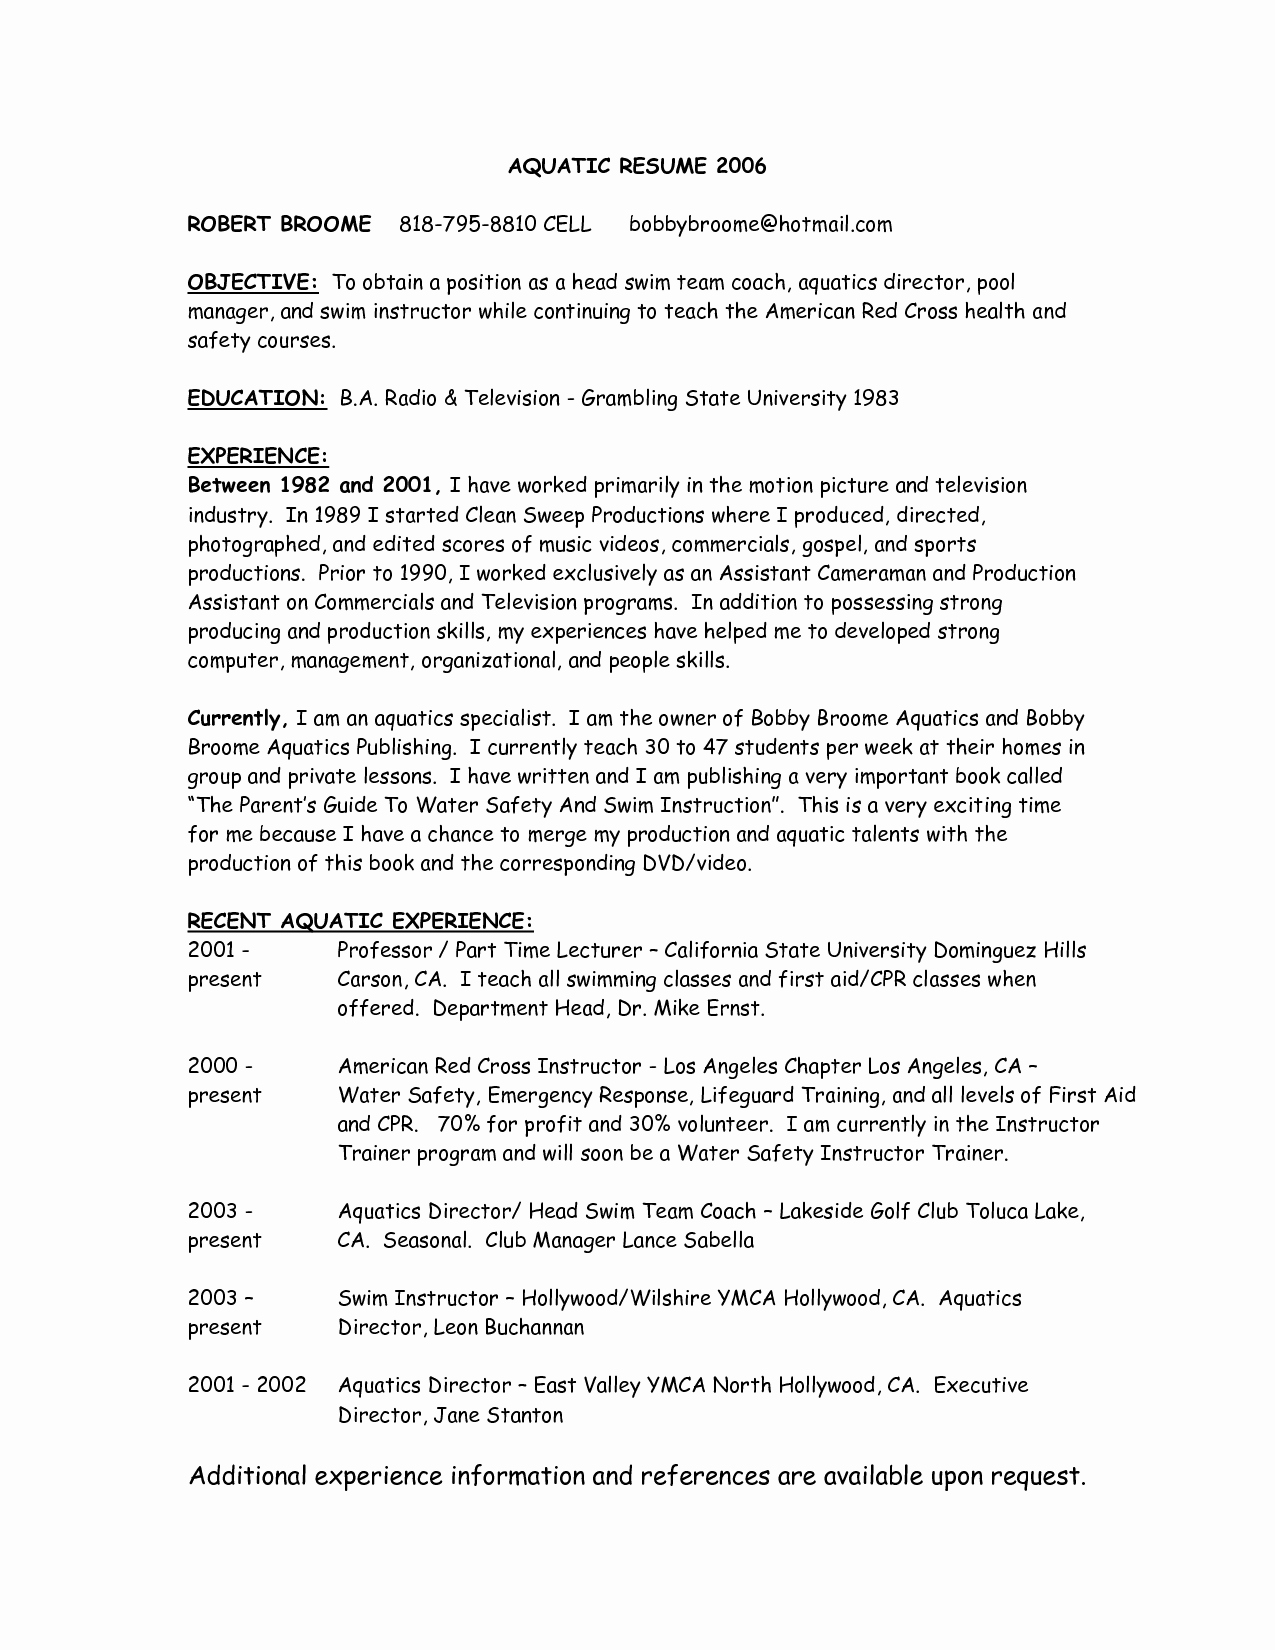 Production assistant Resume Examples Awesome Production assistant Resume Sample Resume Ideas